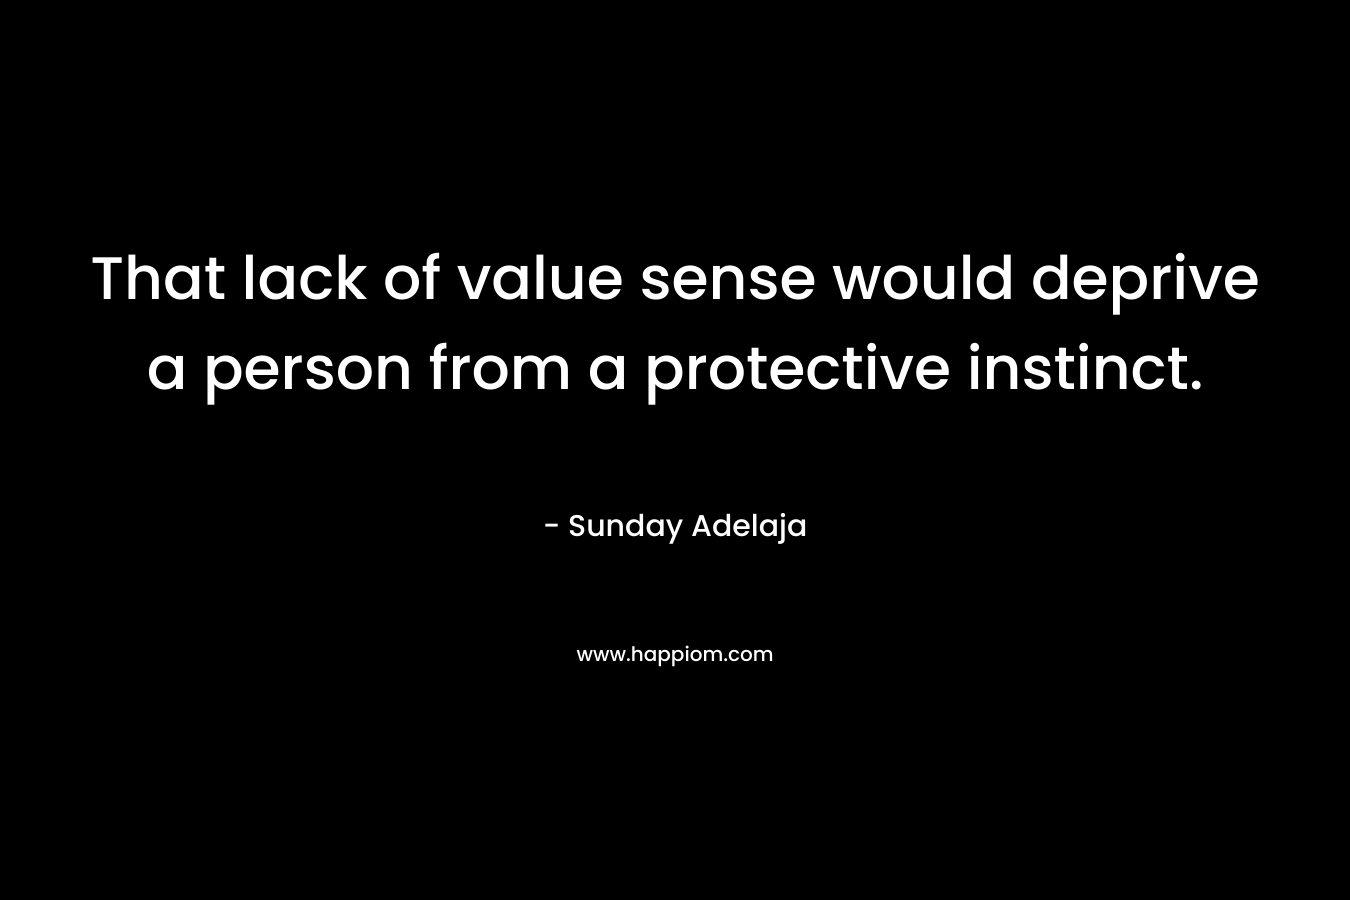 That lack of value sense would deprive a person from a protective instinct.